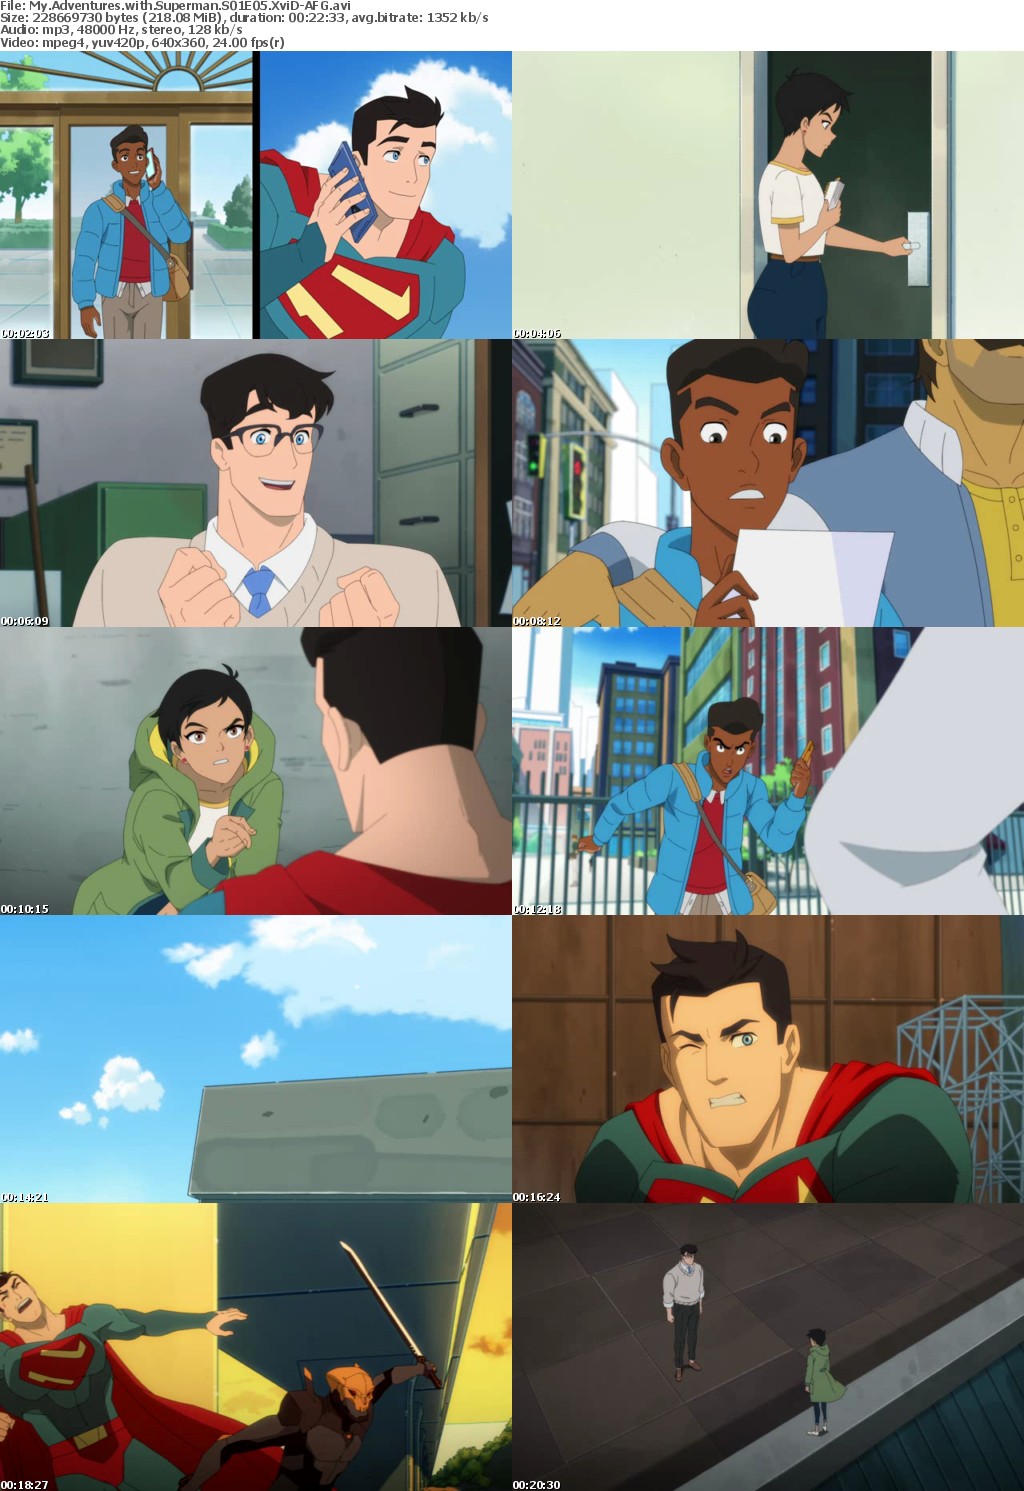 My Adventures with Superman S01E05 XviD-AFG